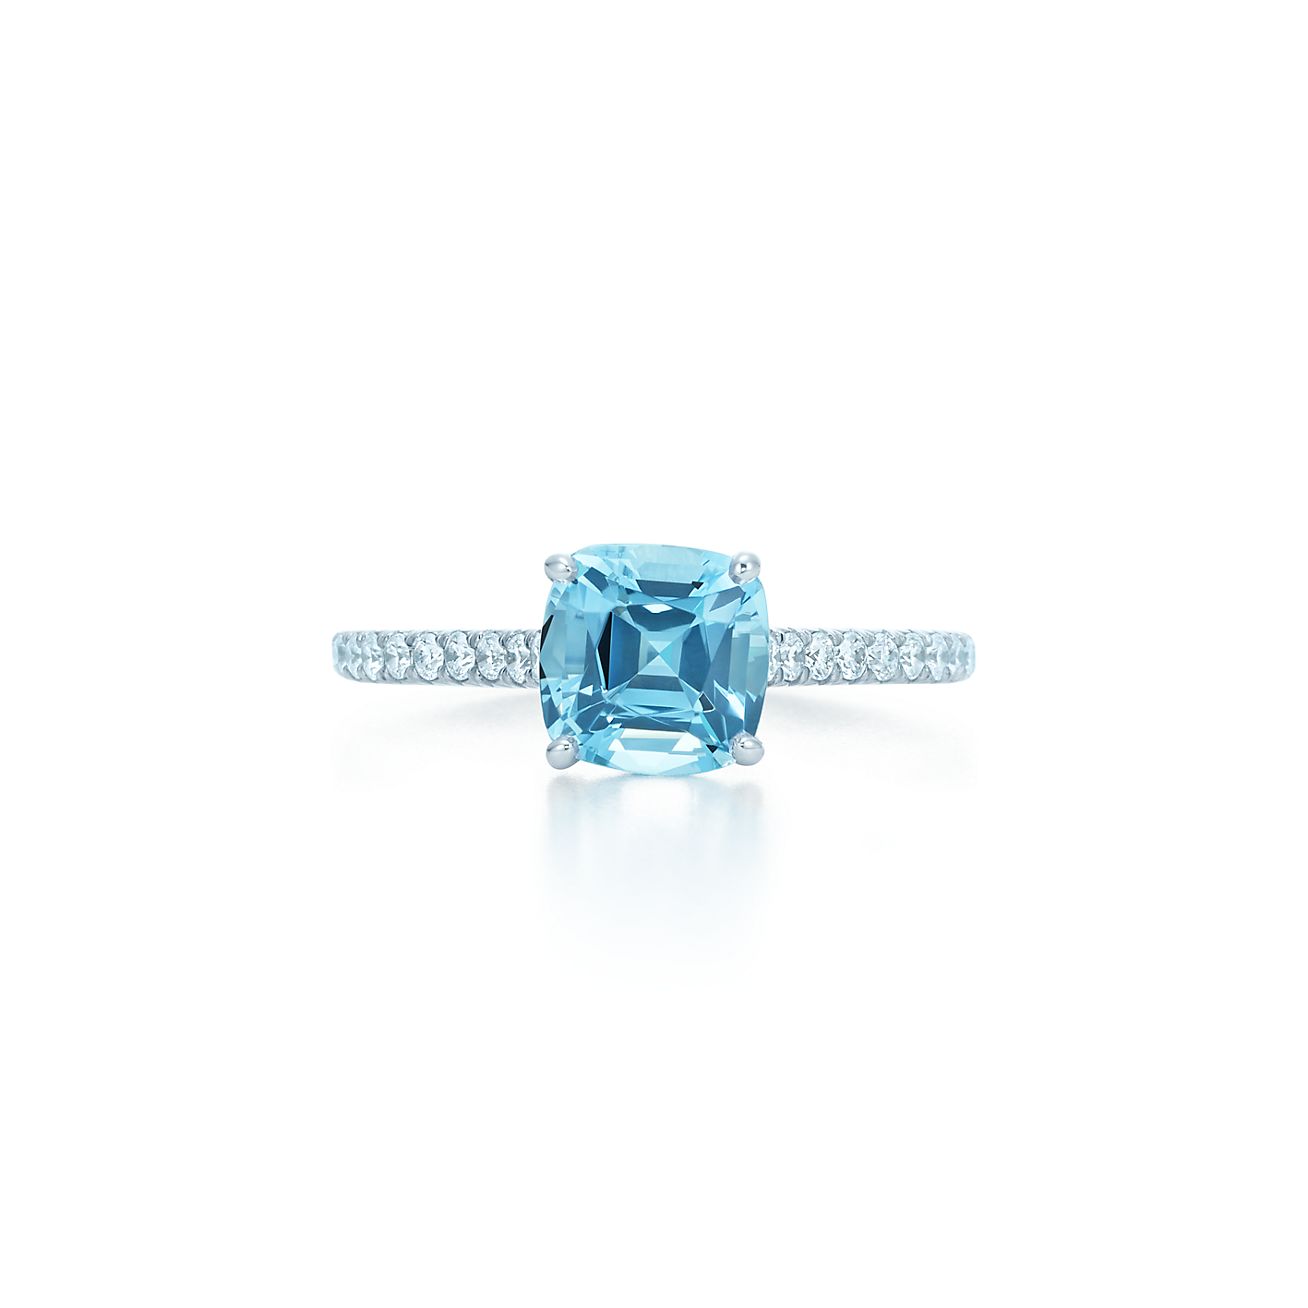 Tiffany Legacy® ring in platinum with 